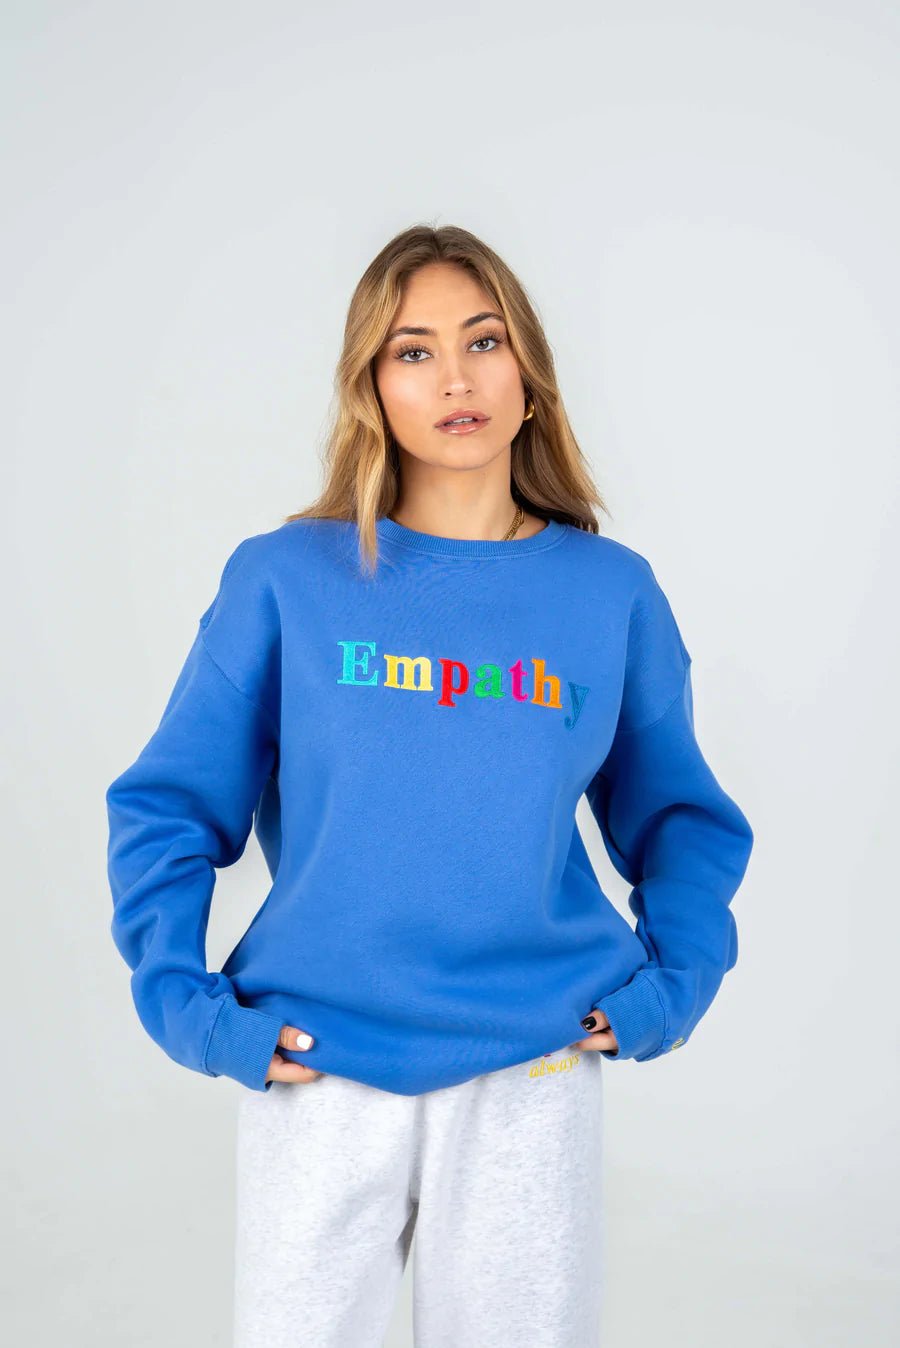 Shop Mayfair EMPATHY ALWAYS Royal Blue Crewneck as seen on Haley Lu Richardson - Premium Sweater from The Mayfair Group Online now at Spoiled Brat 